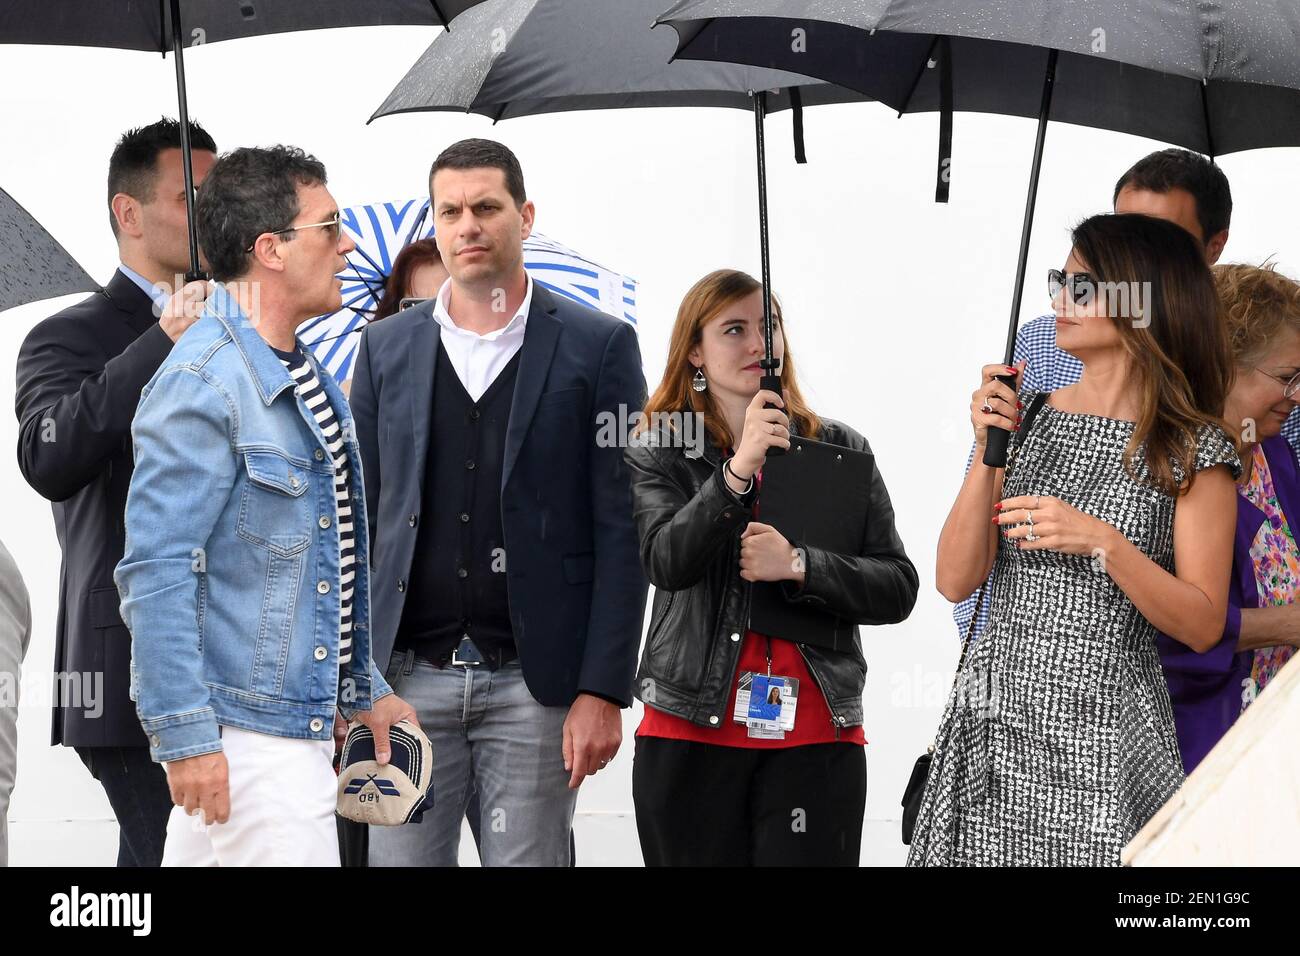 Penelope Cruz and Antonio Banderas at the "Pain And Glory" Photocall at the 72th International Cannes Film Festival in Cannes, France on May 18, 2019. (Photo by Lionel Urman/Sipa USA) Stock Photo